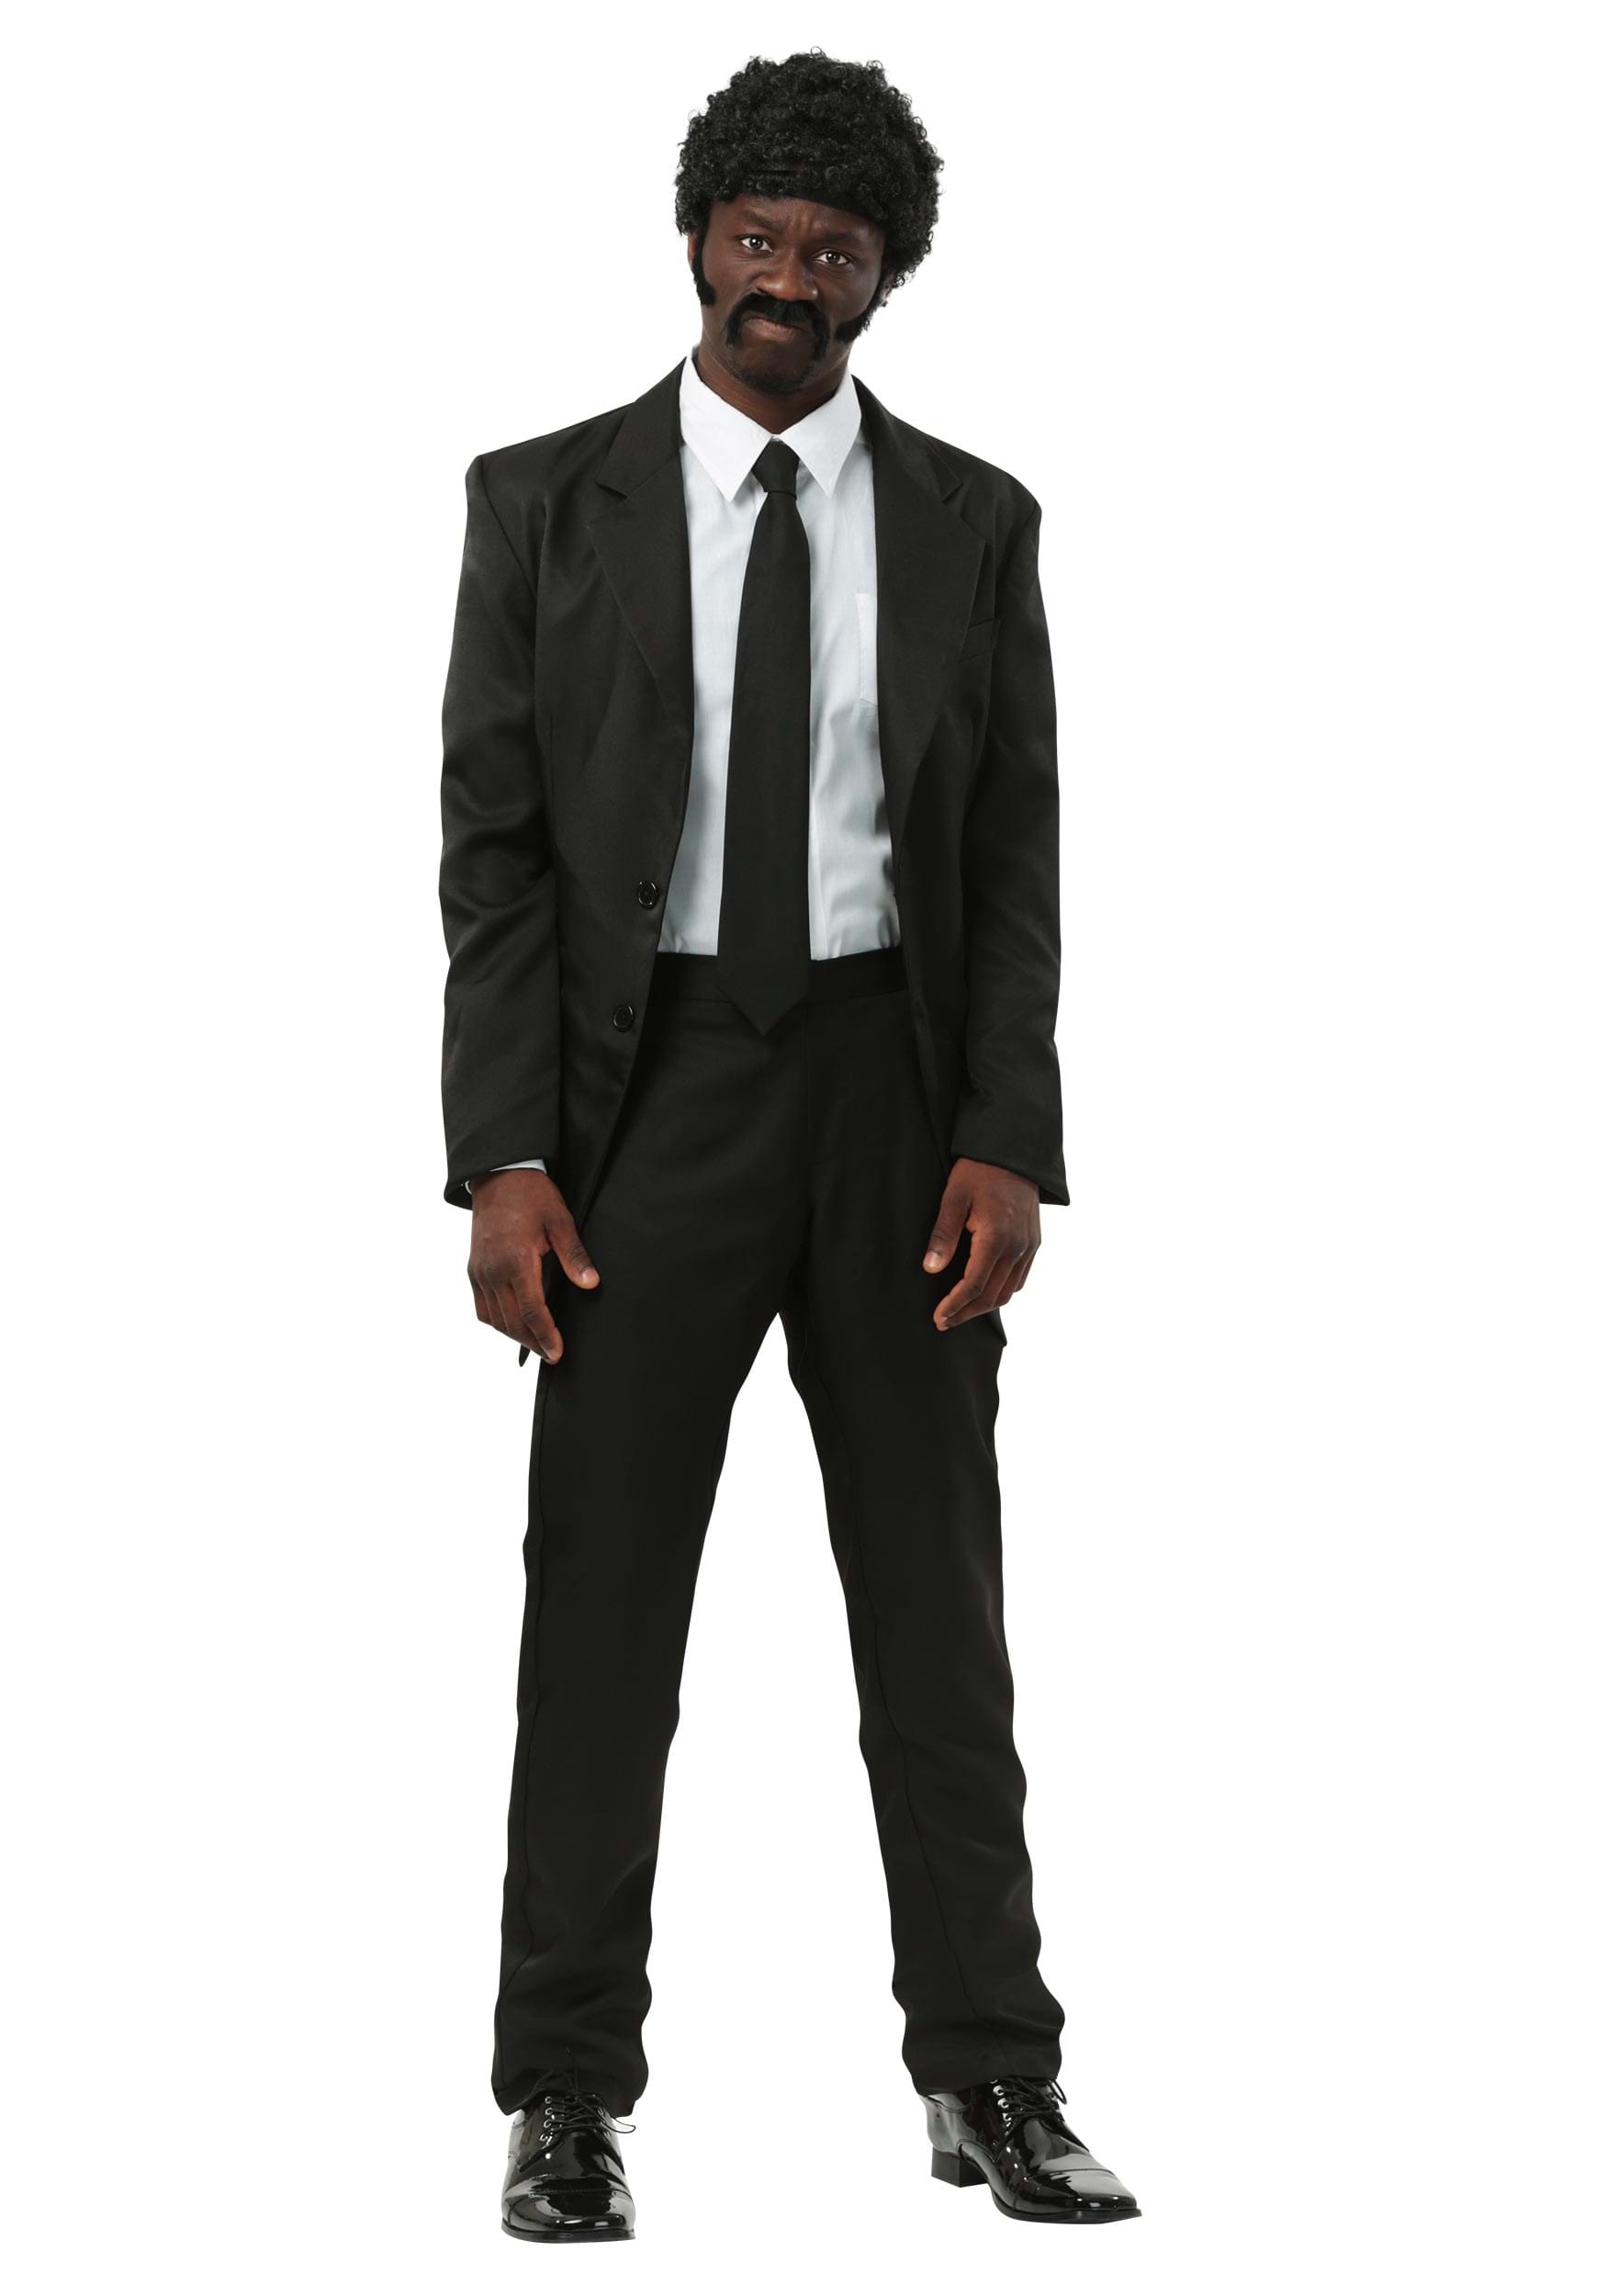 Image of Pulp Fiction Suit Costume for Men ID FUN6635AD-L